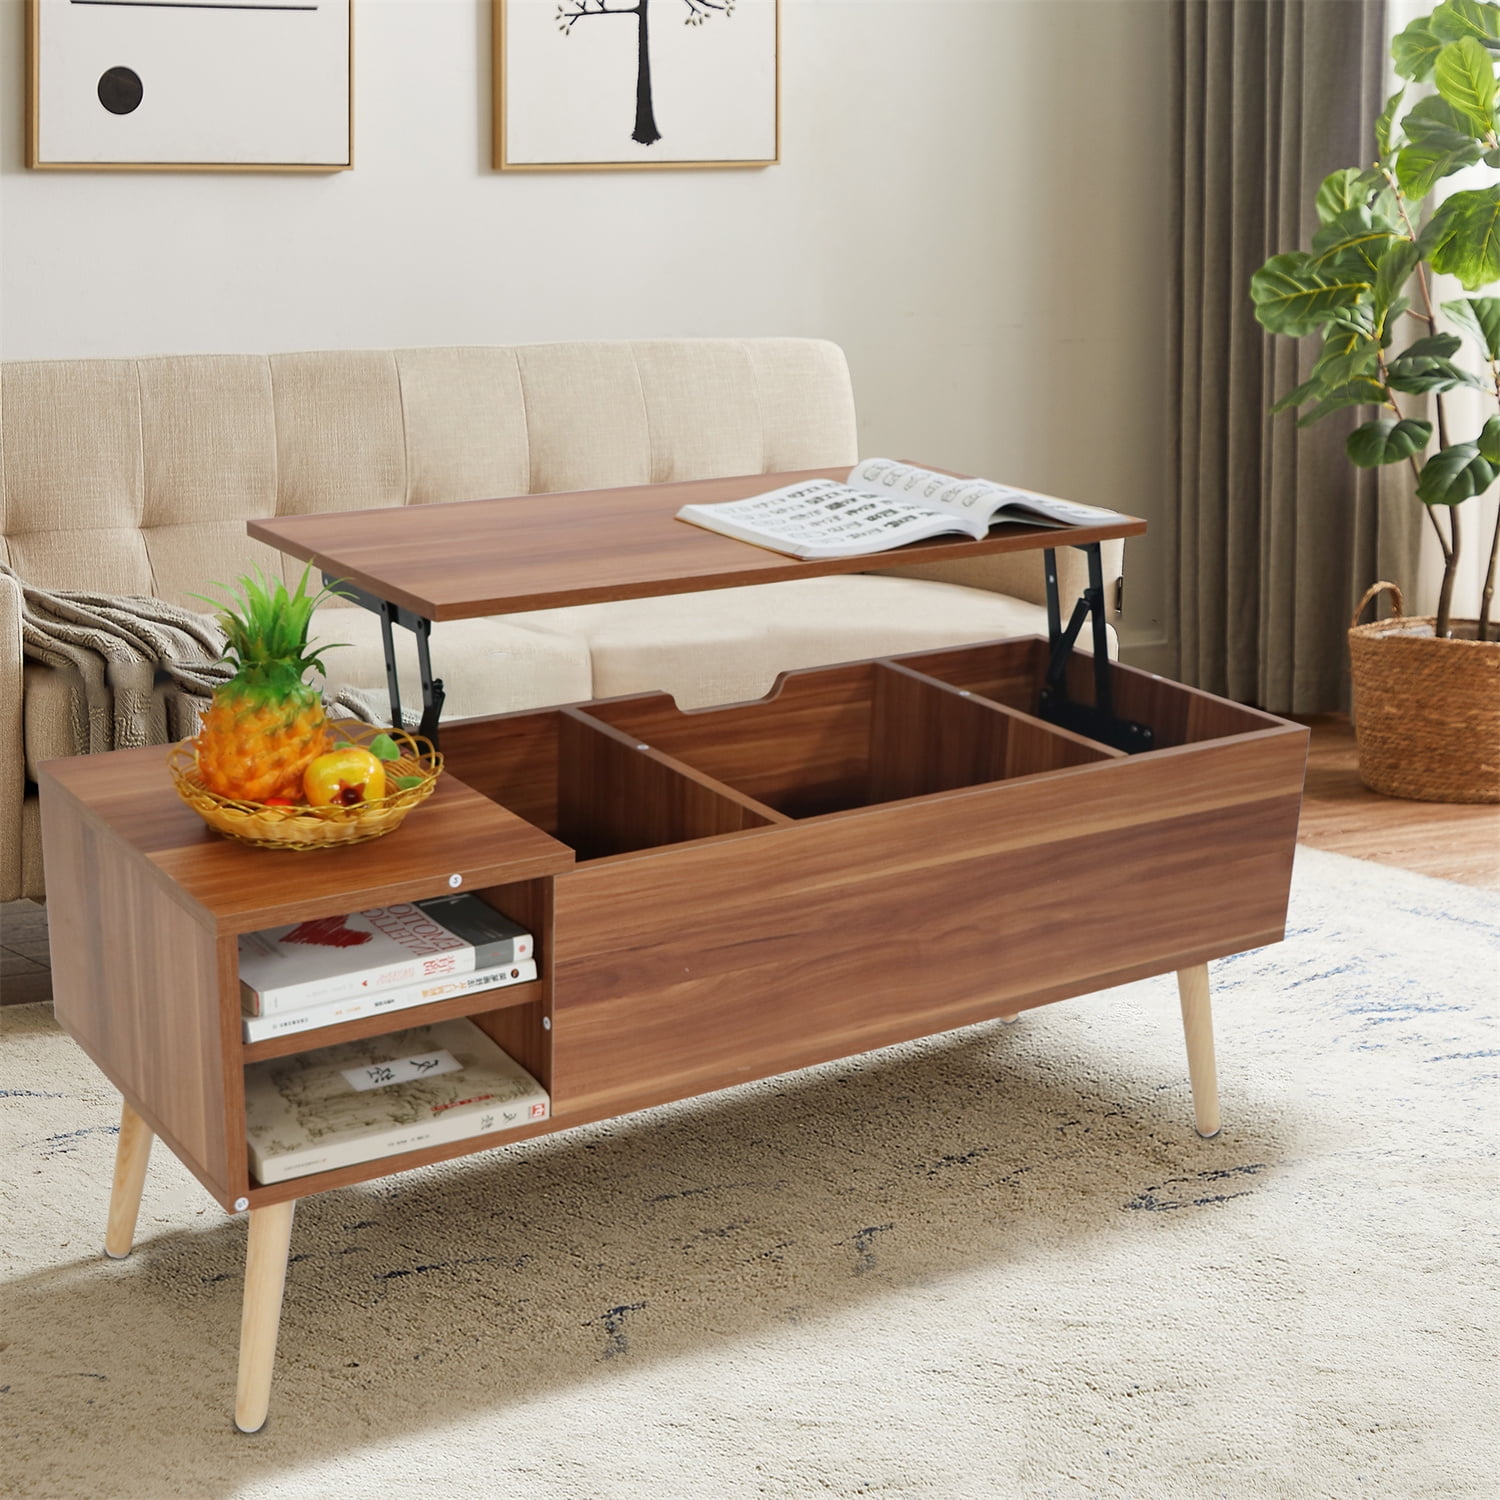 43.30 Inch Coffee Table with Hidden Storage Compartment and Open ...